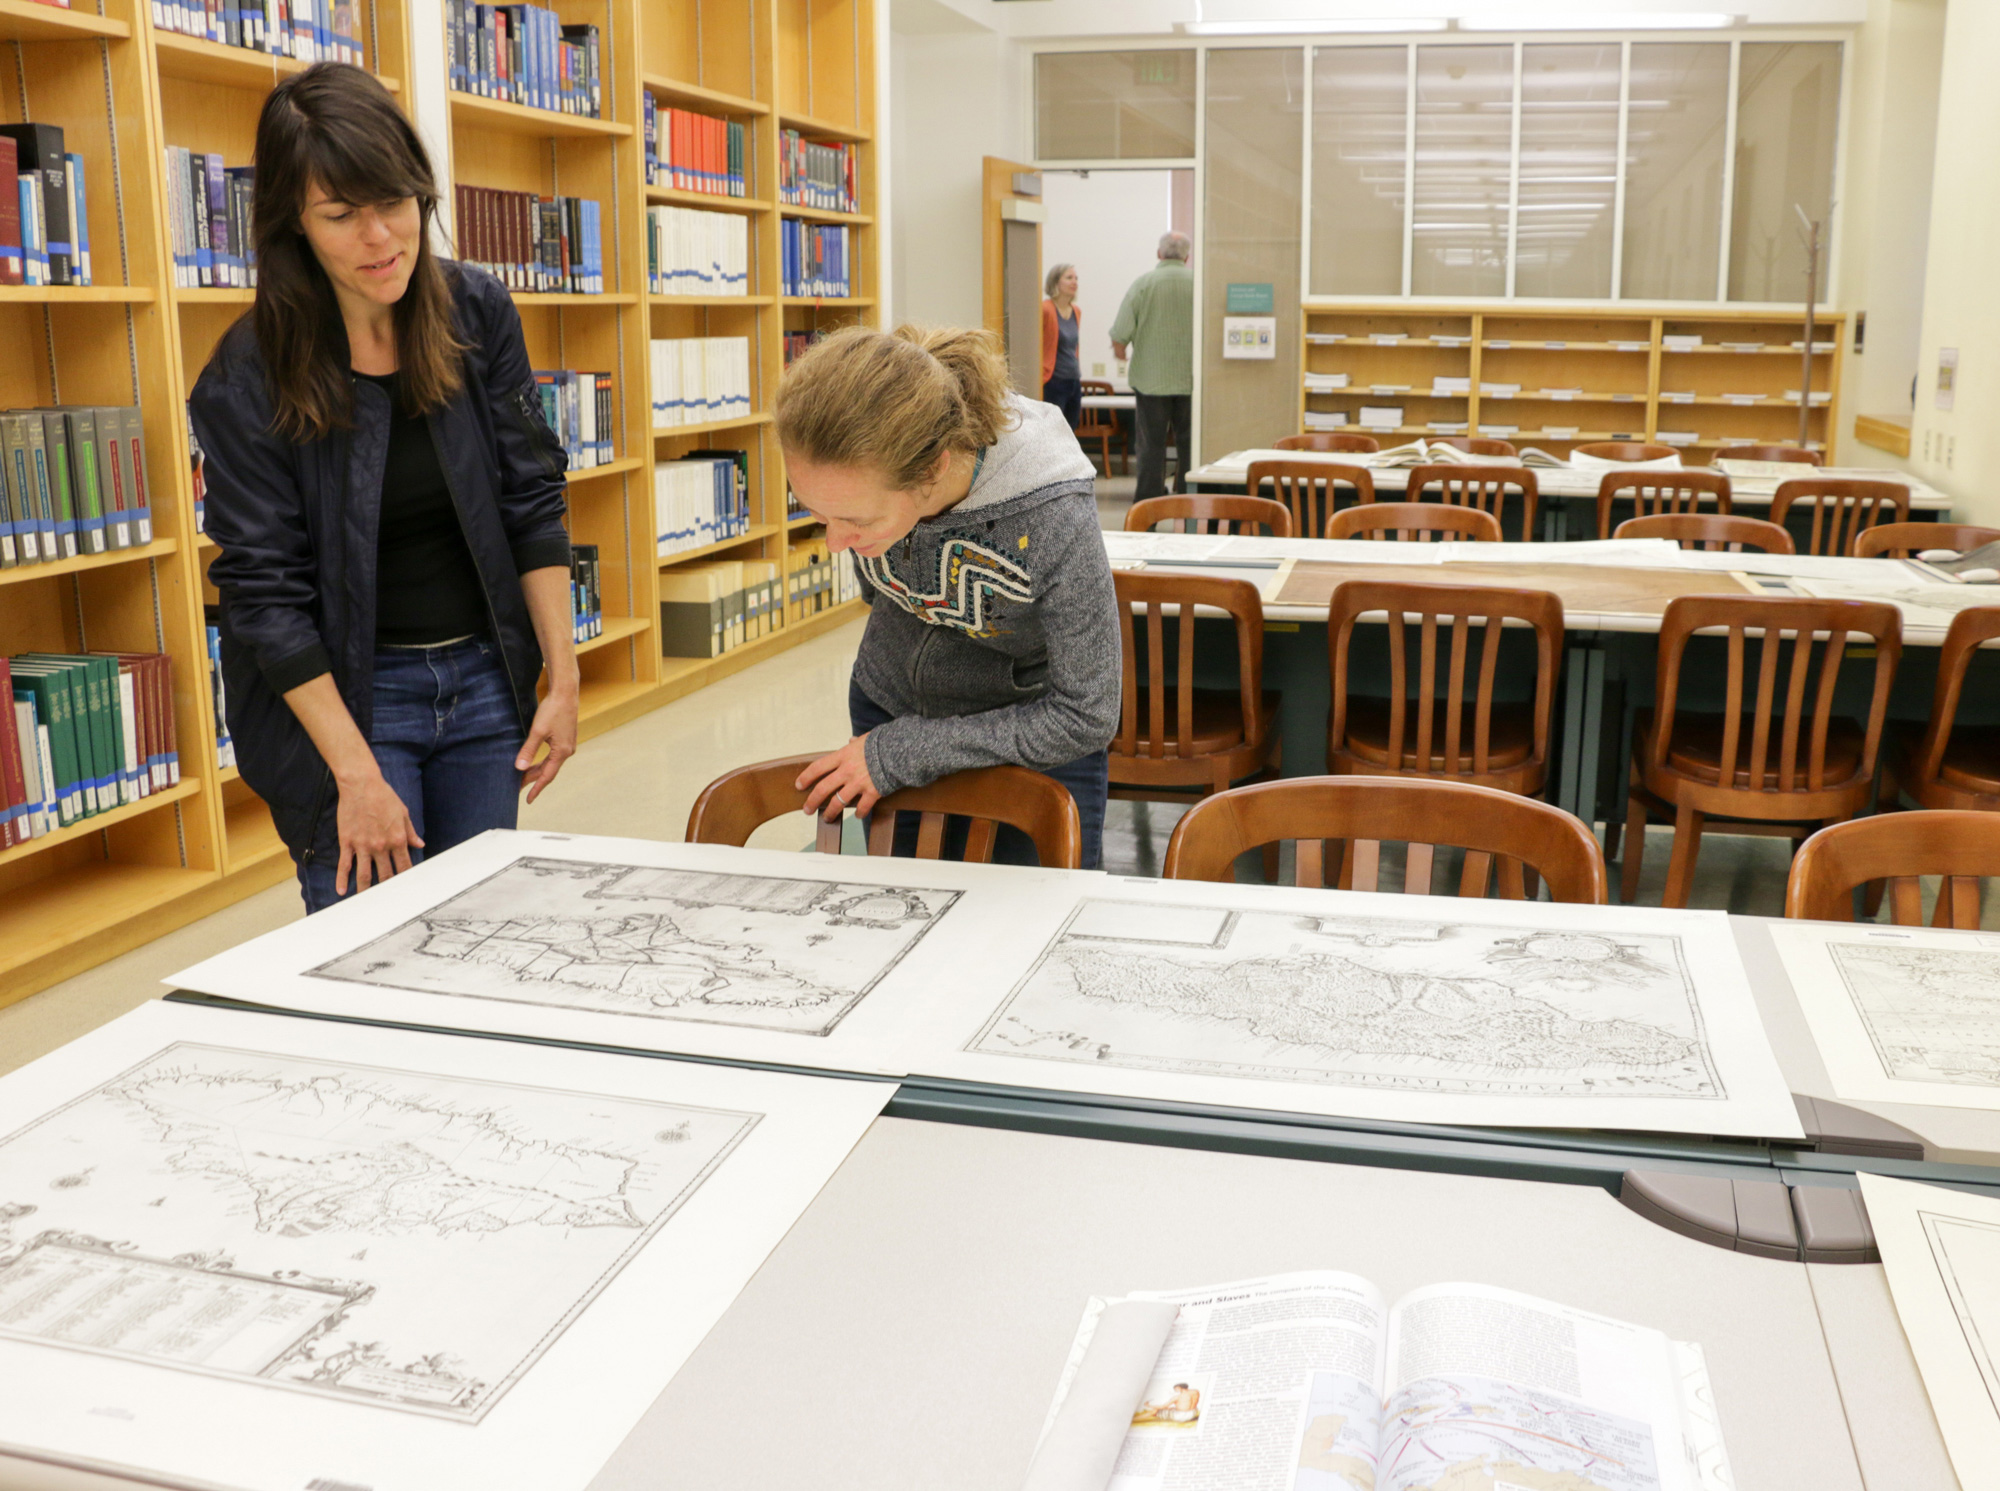 History graduate students Nicole Viglini, left, and Amy O’Hearn discuss Hamilton, in Maps, a pop-up exhibit on display Friday at the Earth Sciences and Map Library. Viglini co-curated the exhibit. (Photo by Jami Smith for the University Library)